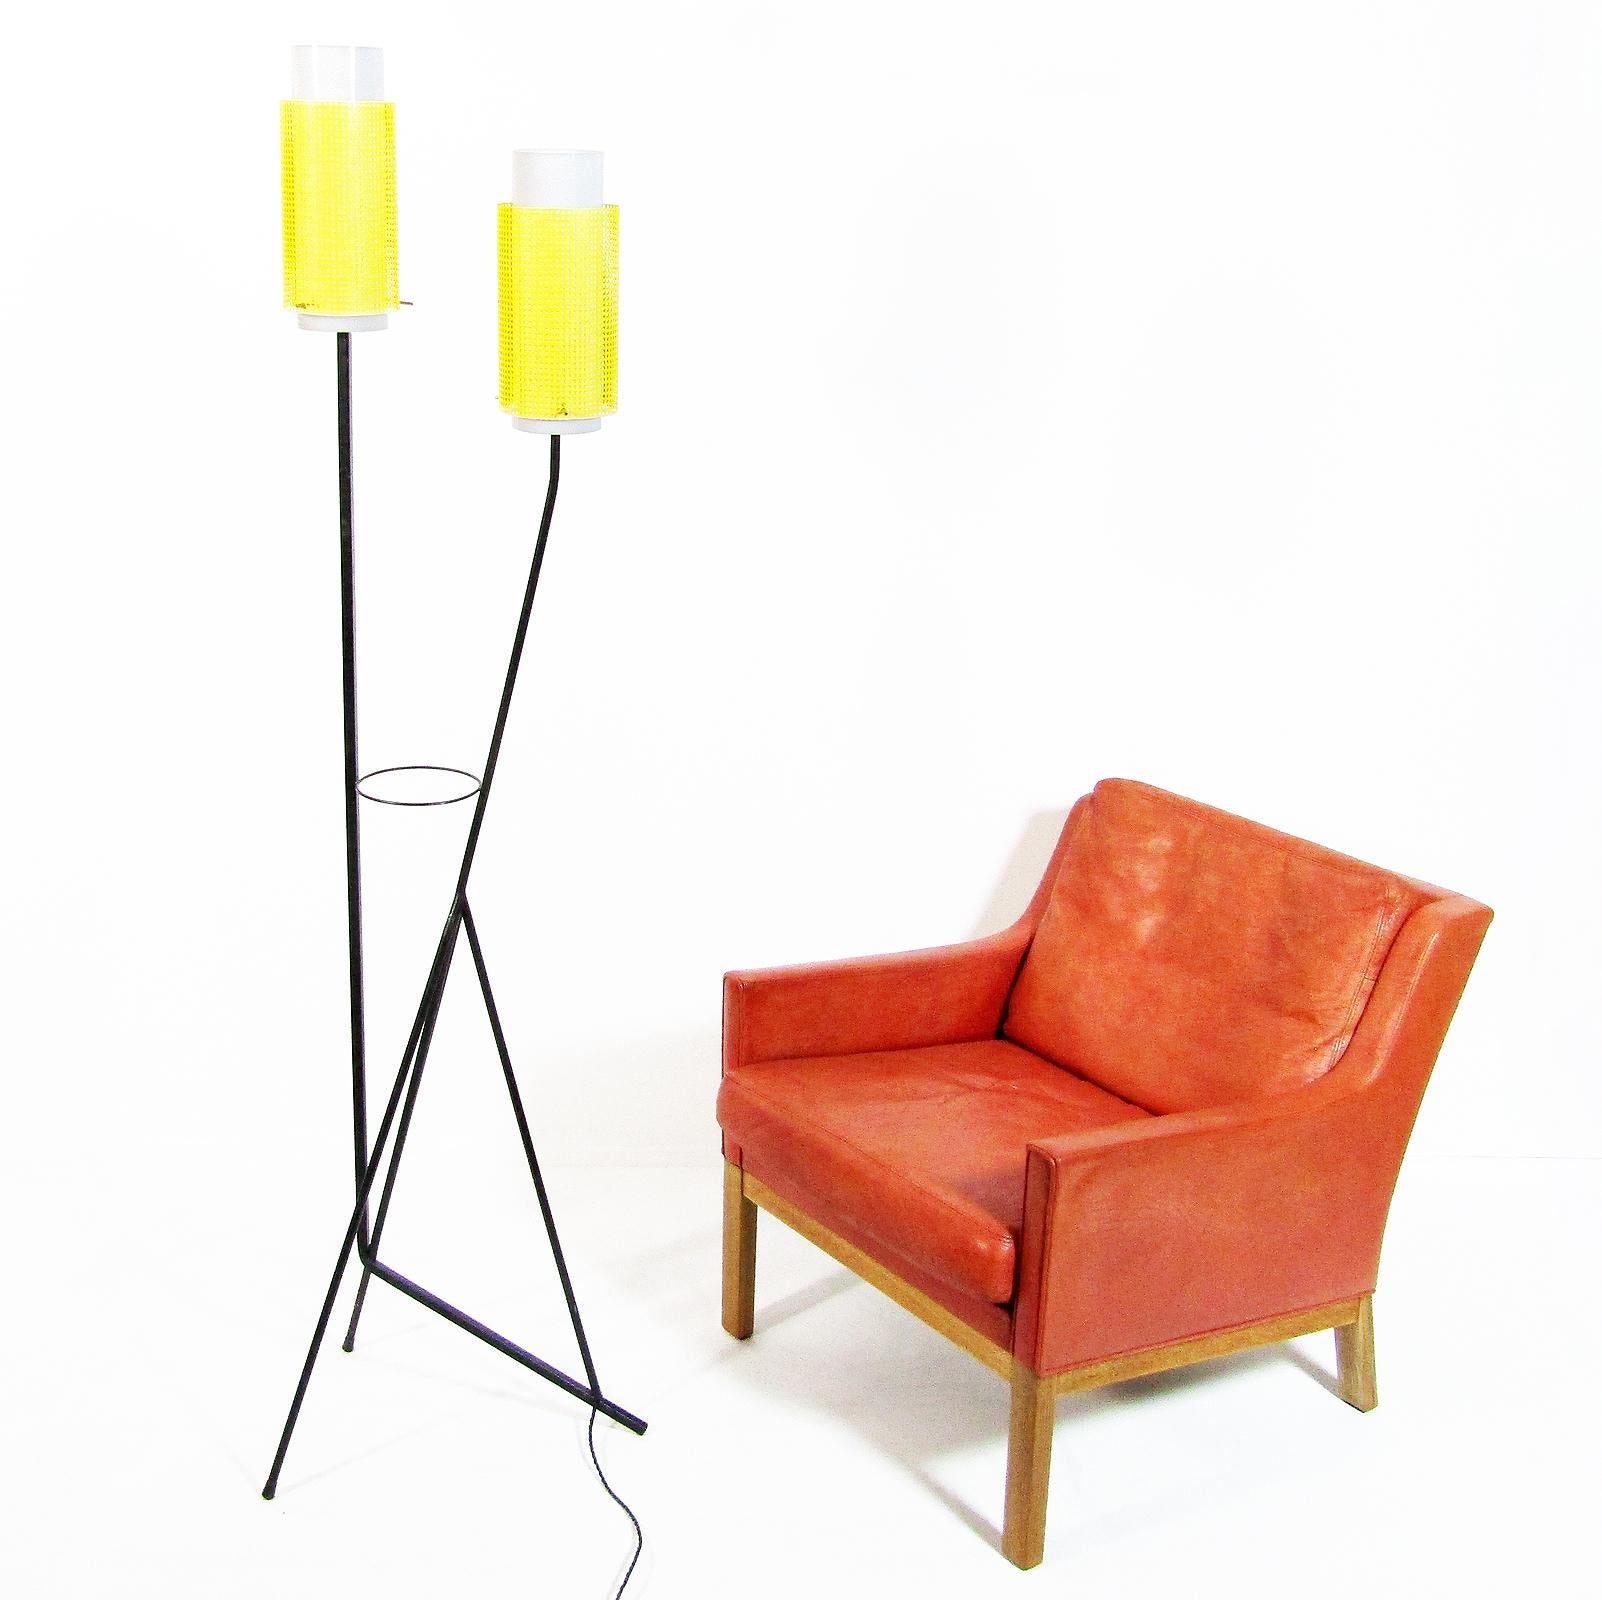 Vintage 1960s French Lovers Modernist Floor Lamp Attrib. Mathieu Mategot In Good Condition For Sale In Shepperton, Surrey